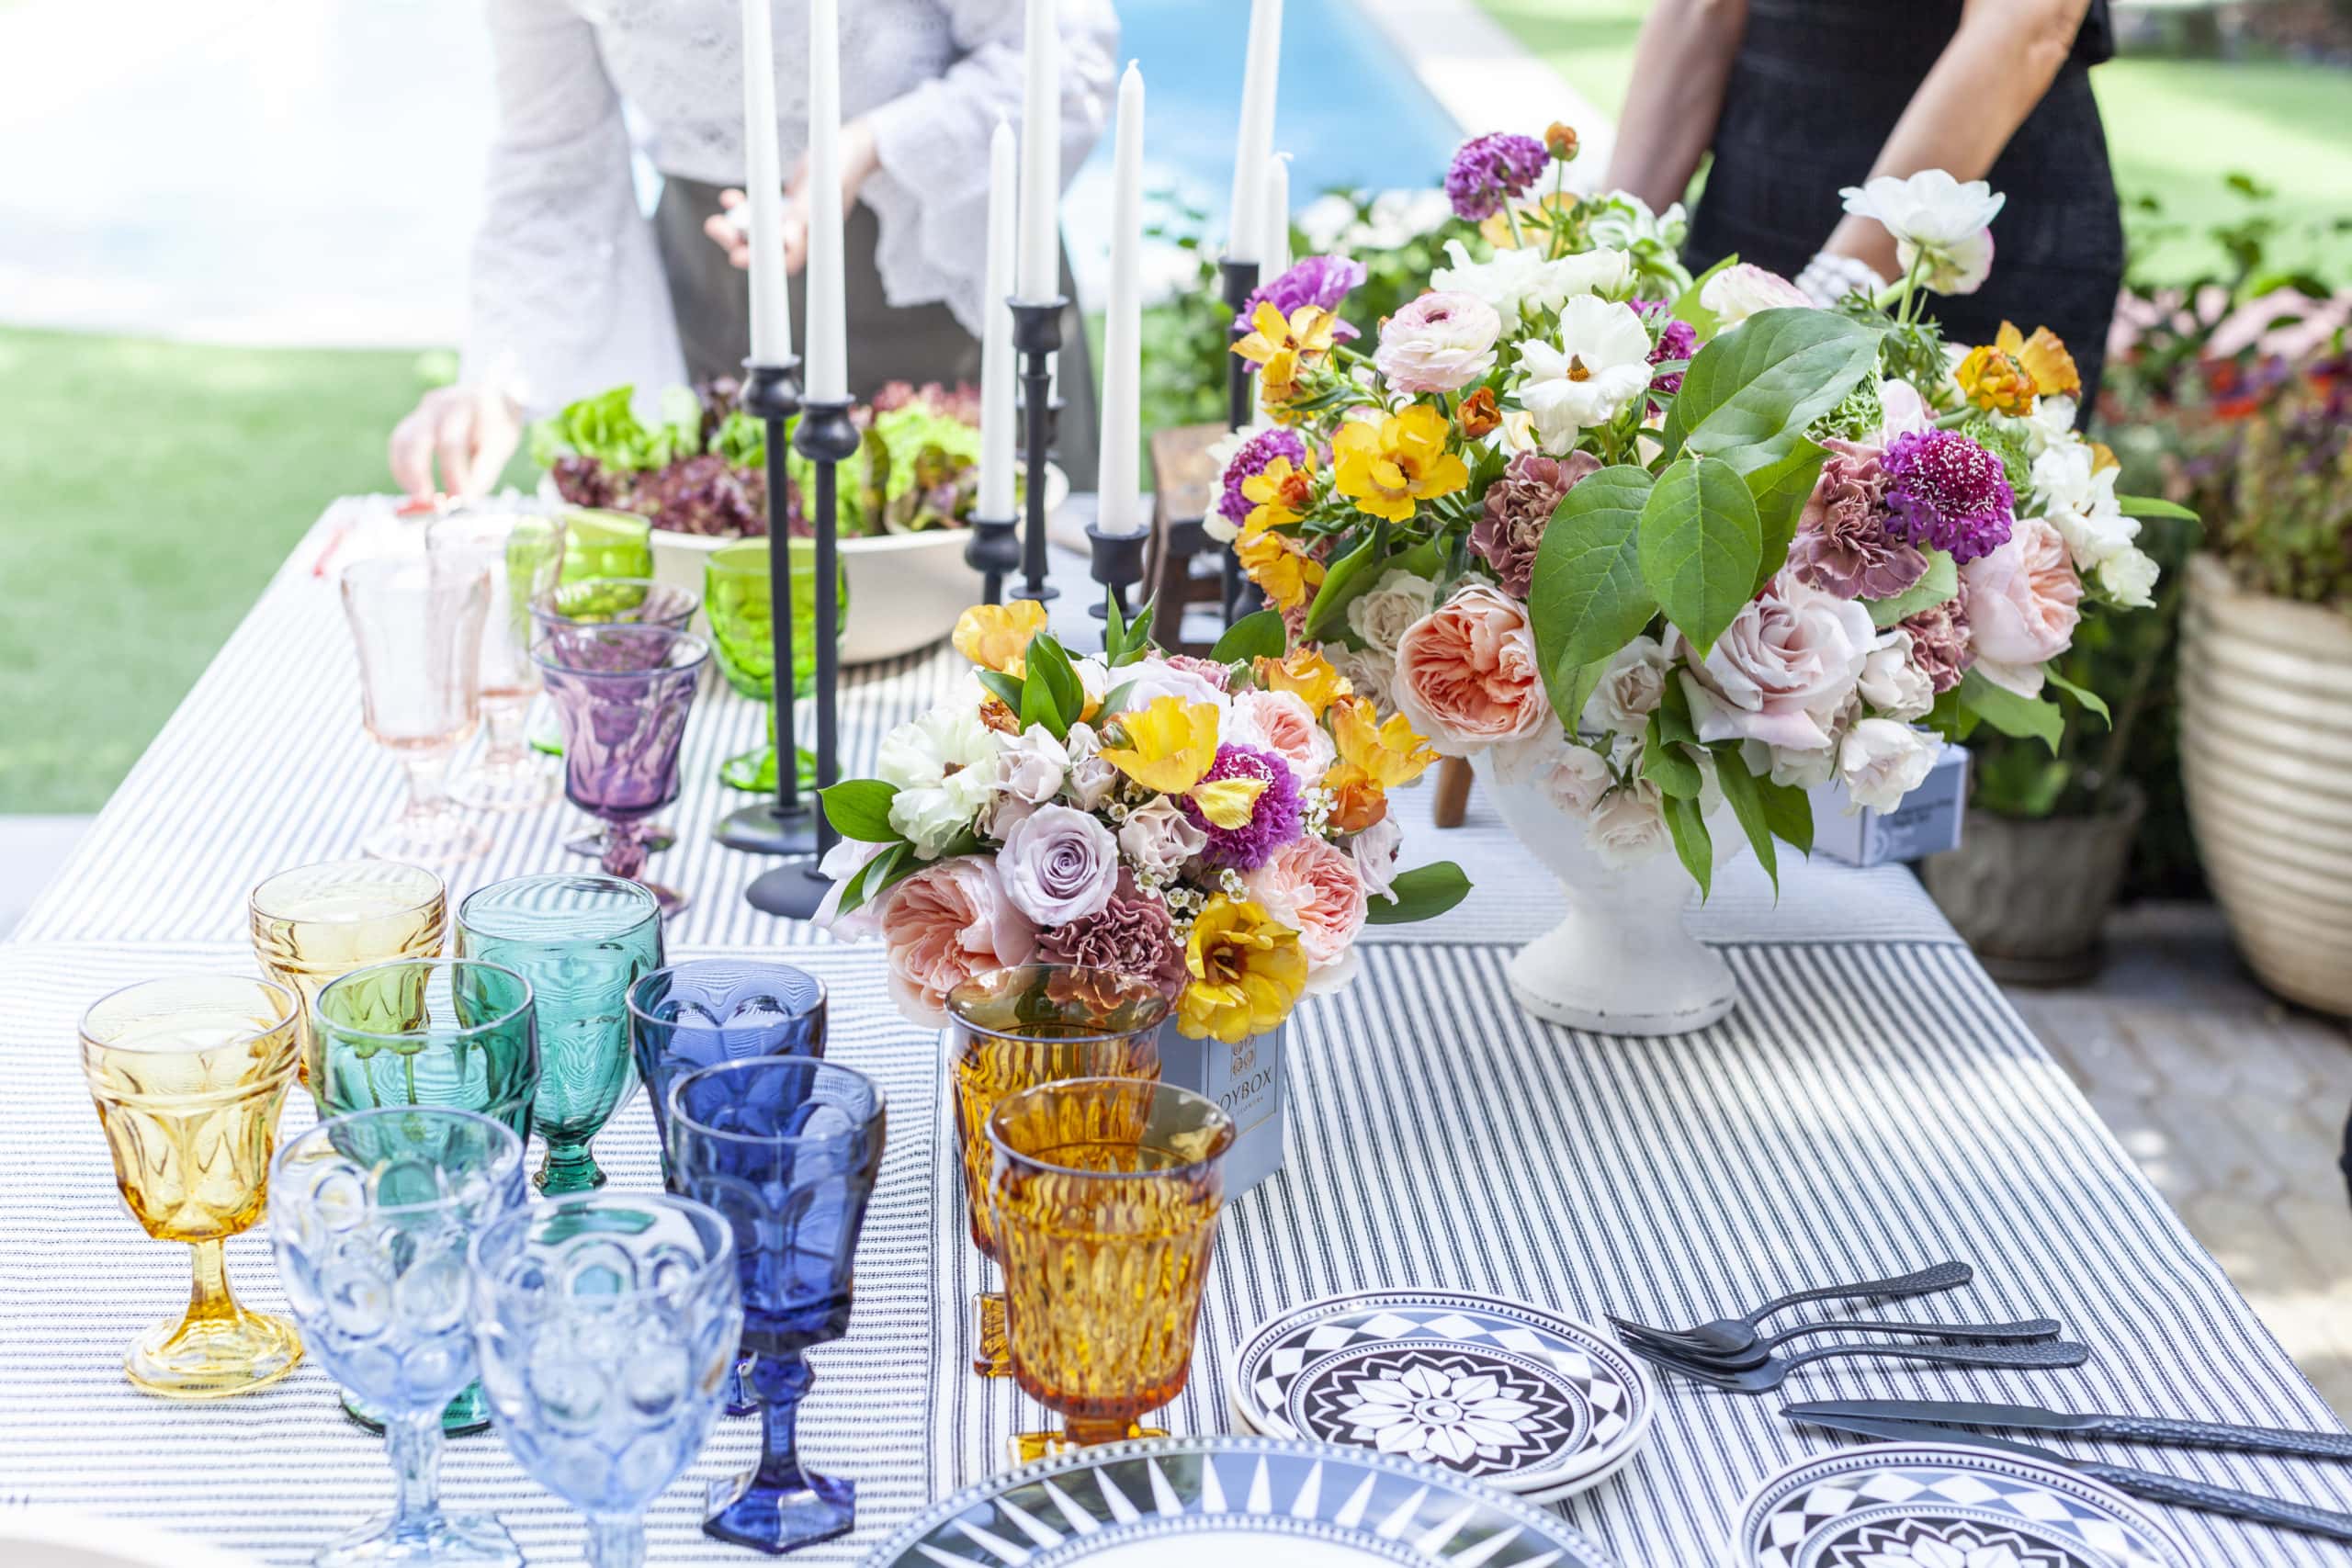 A colorful tablescape for dining al fresco with flowers and vintage glassware